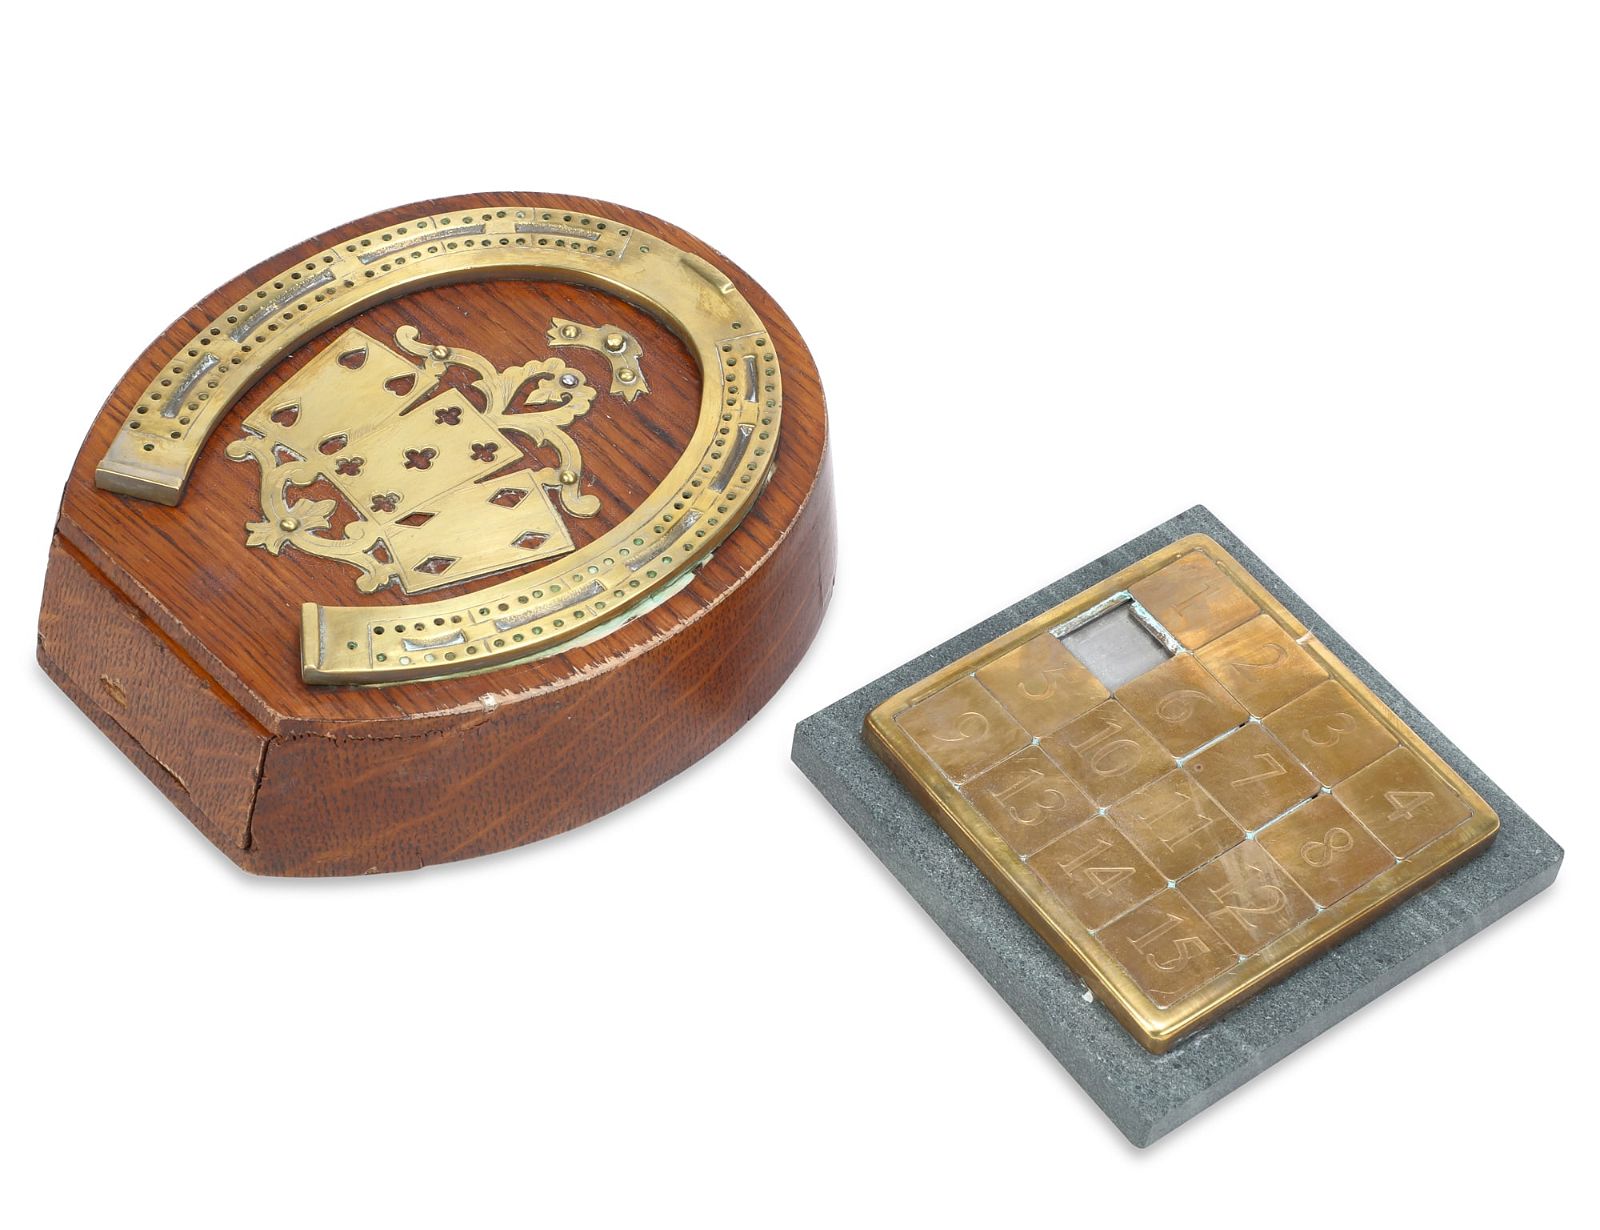 TWO BRASS AND WOOD GAME BOARDSTwo brass